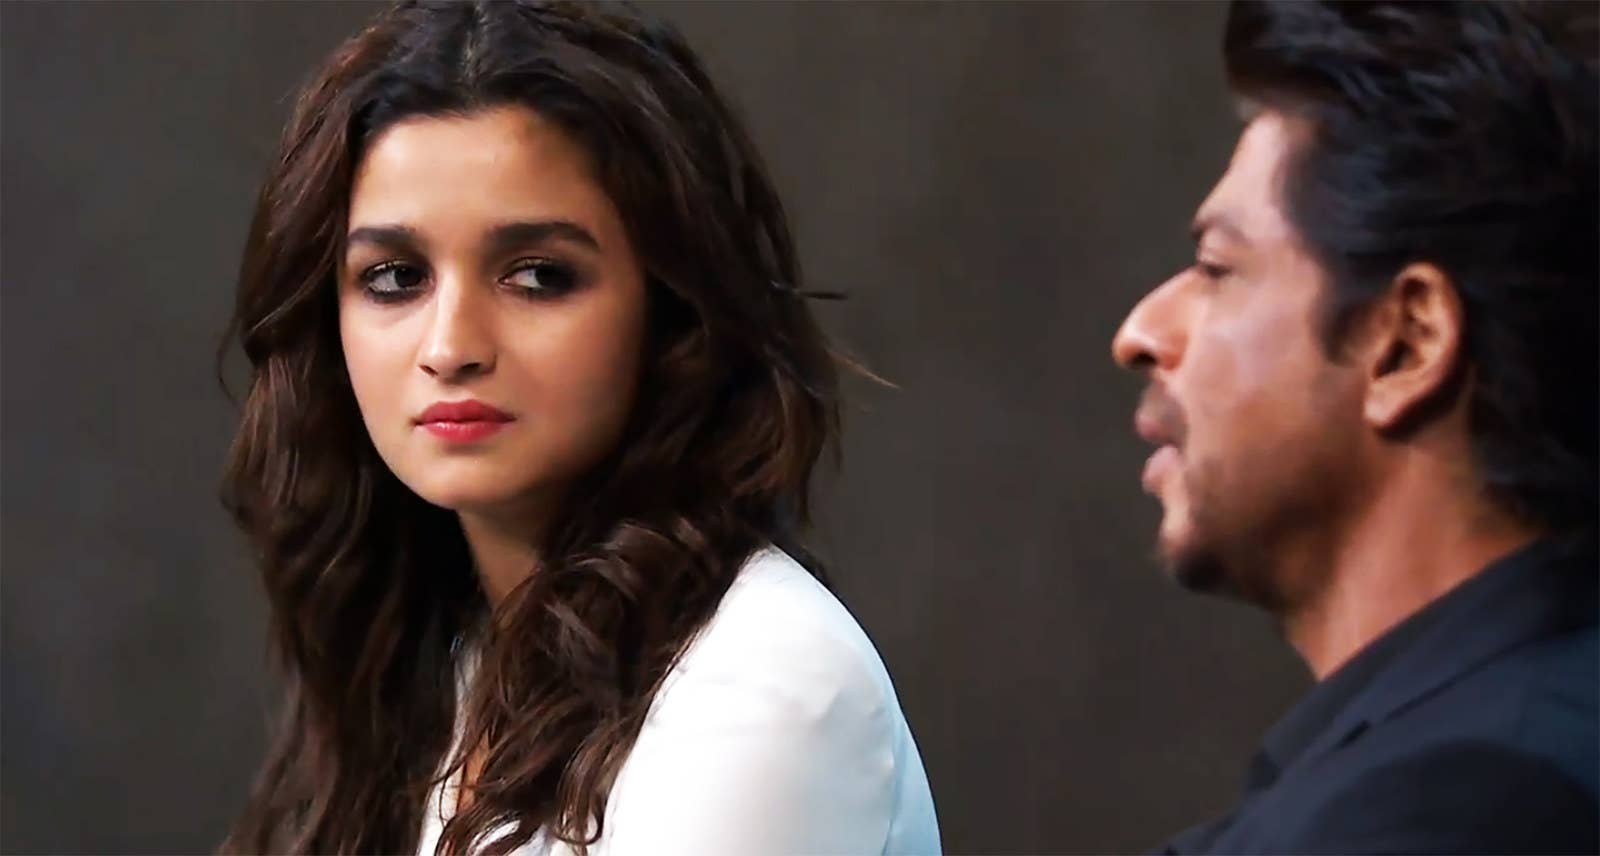 Xxx Alyabhatt Sexy Videos - Alia Bhatt Is An Incredible Actor, But Her Real Skill Is Decision-Making